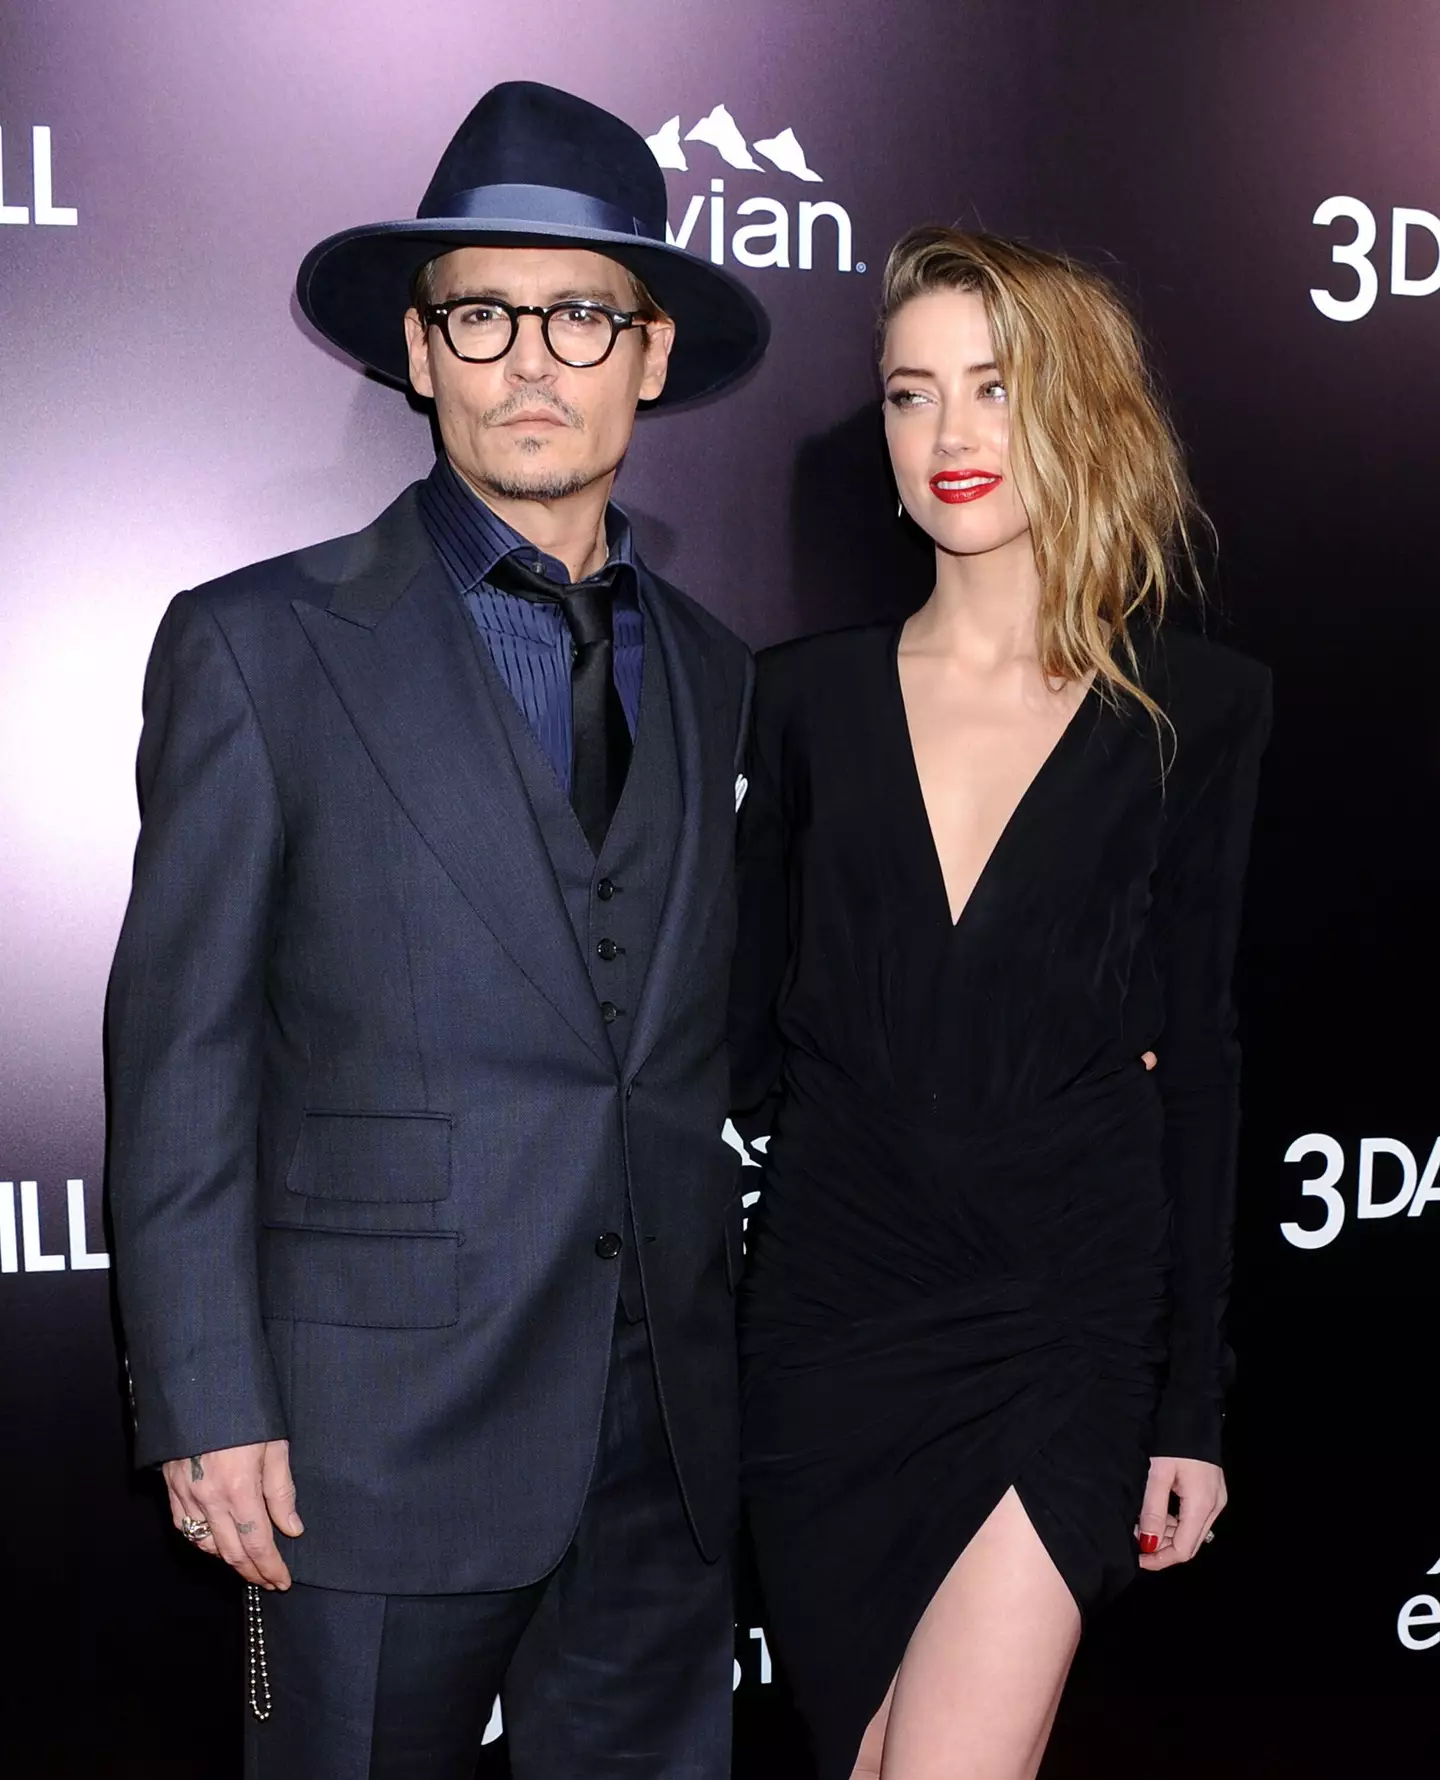 Depp also took aim at Heard’s allegations against him, calling her claim to have been a victim of domestic abuse 'quite heinous and disturbing'.